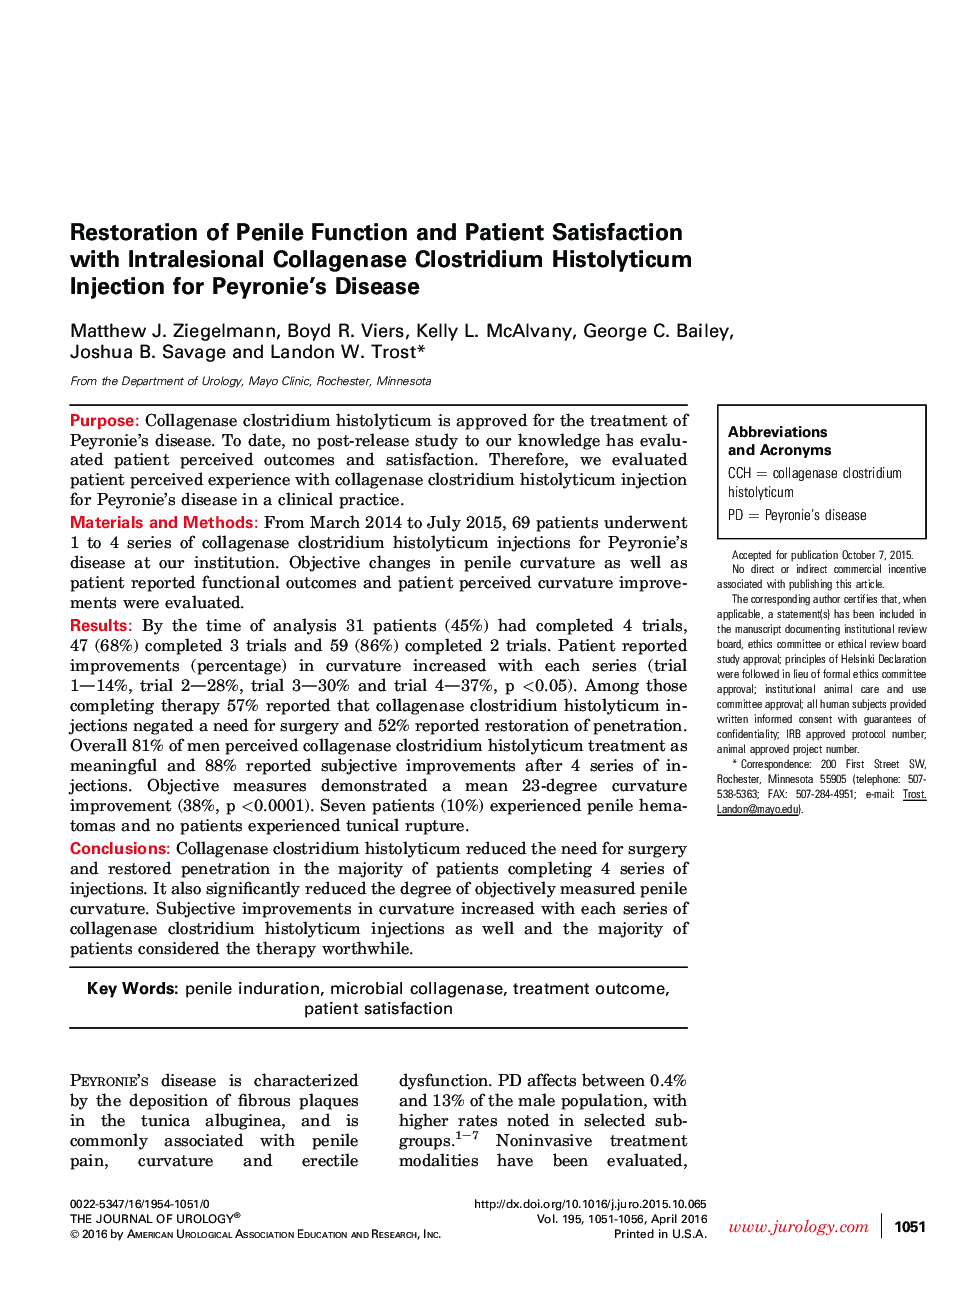 Restoration of Penile Function and Patient Satisfaction with Intralesional Collagenase Clostridium Histolyticum Injection for Peyronie’s Disease 